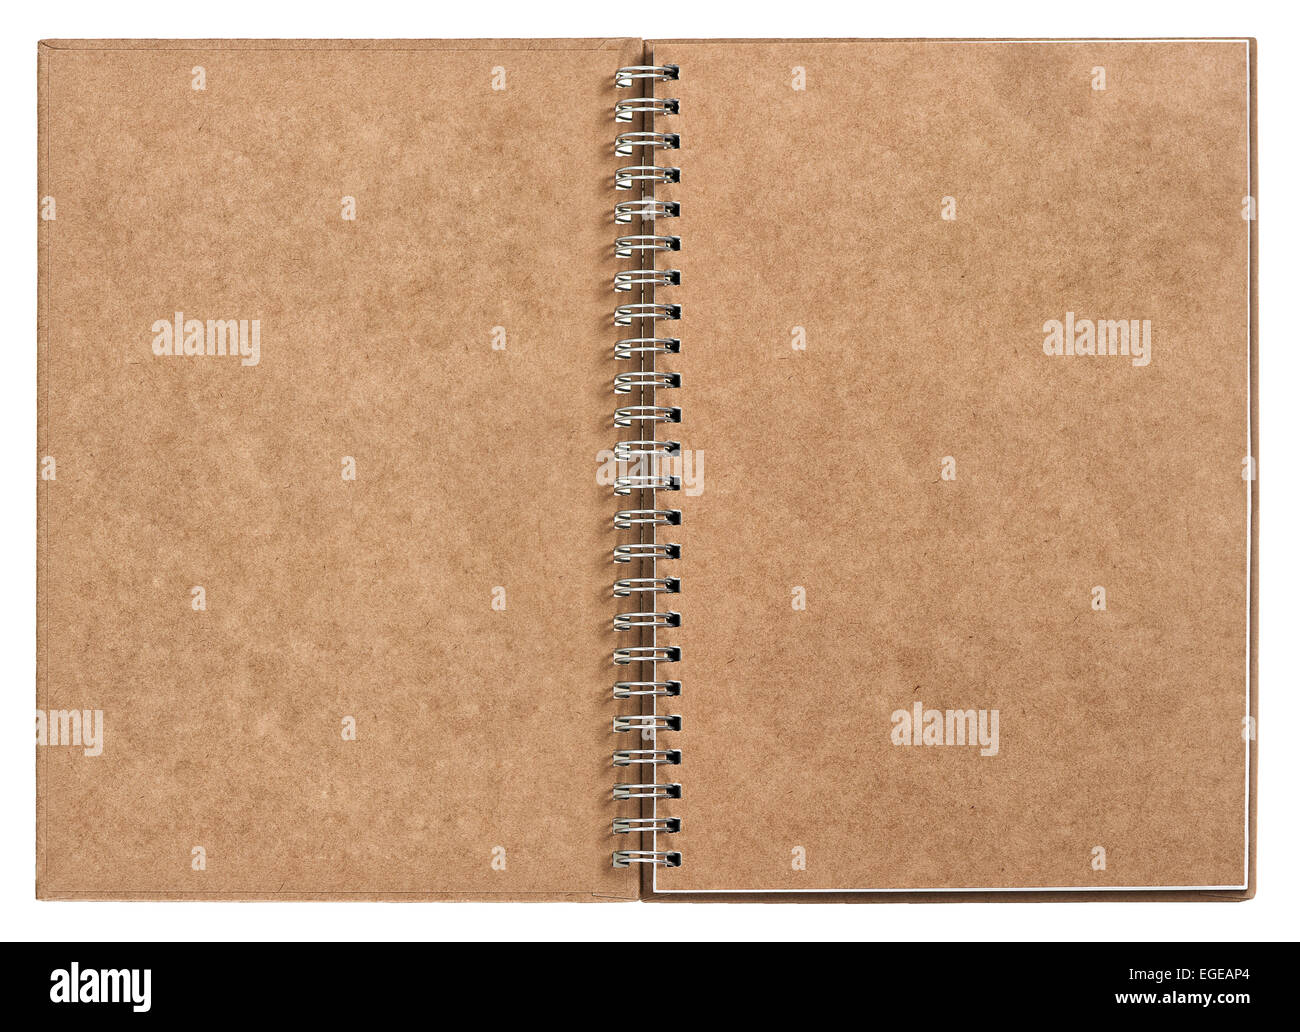 open notebook with ring binder isolated on white background. recycled craft paper Stock Photo